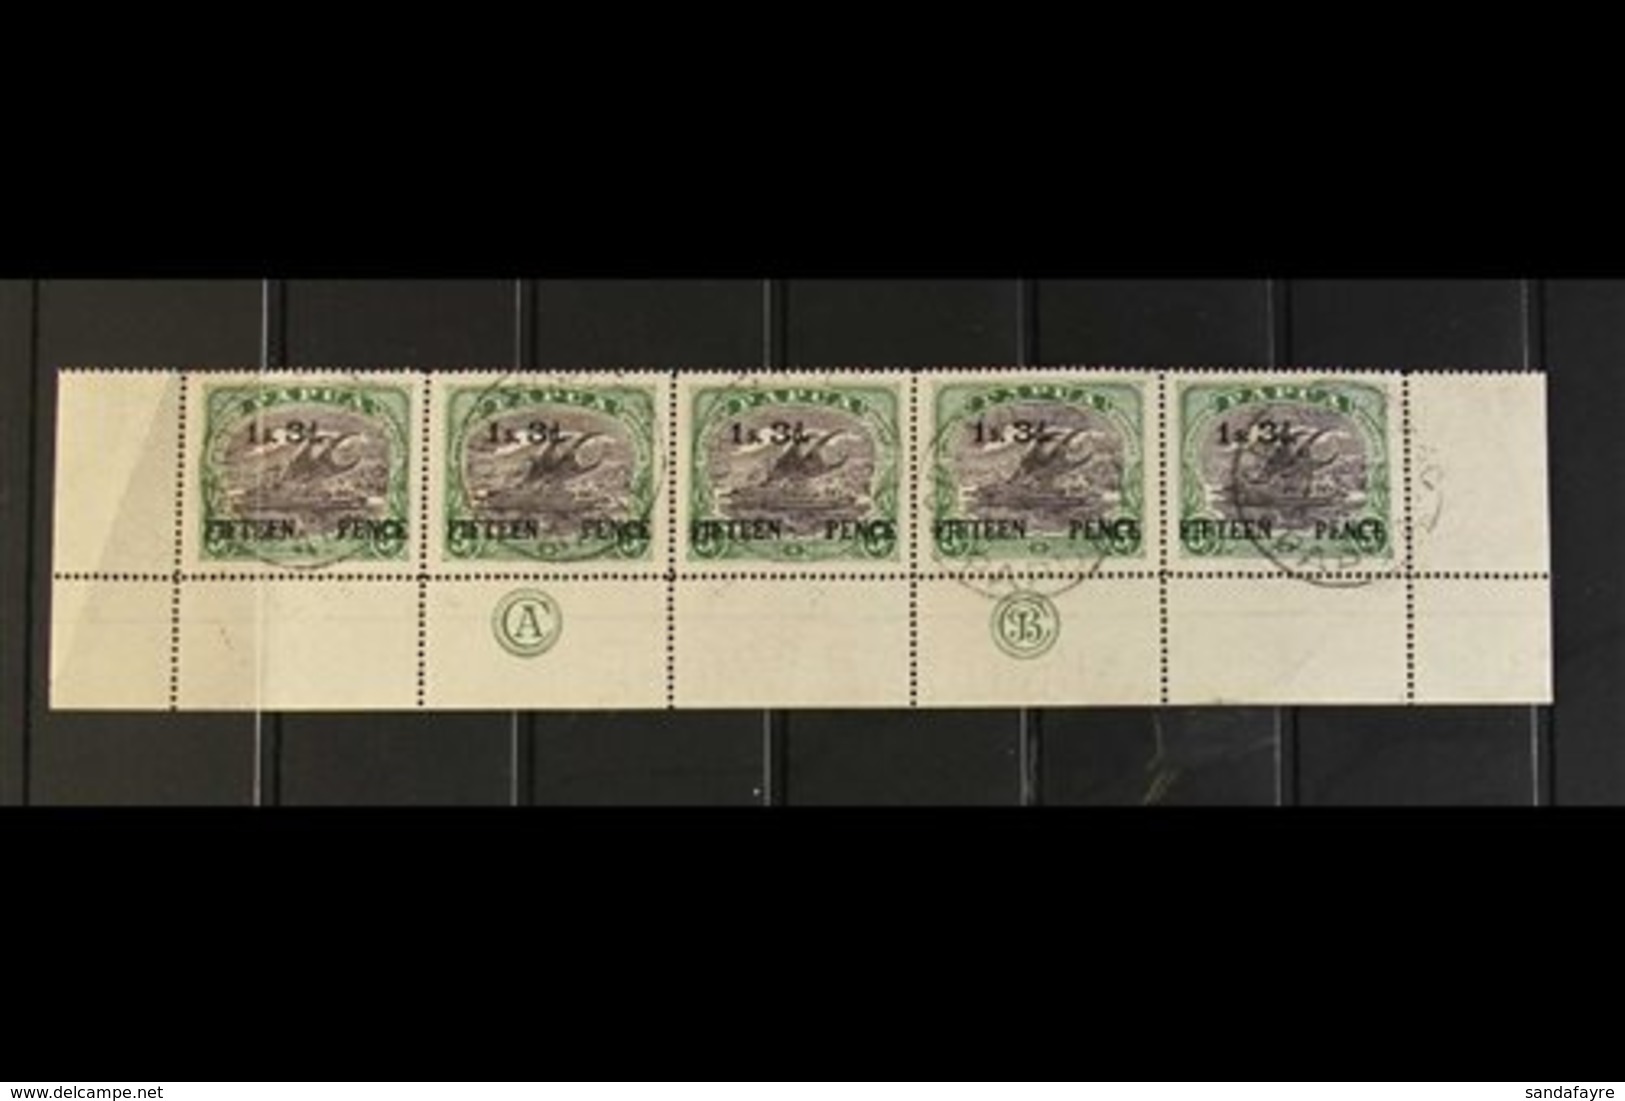 1931  1s3d On 5s Black And Deep Green, SG 123, Complete Lower Row Of The Sheet Showing JBC Imprint, Fine Port Moresby Cd - Papua New Guinea